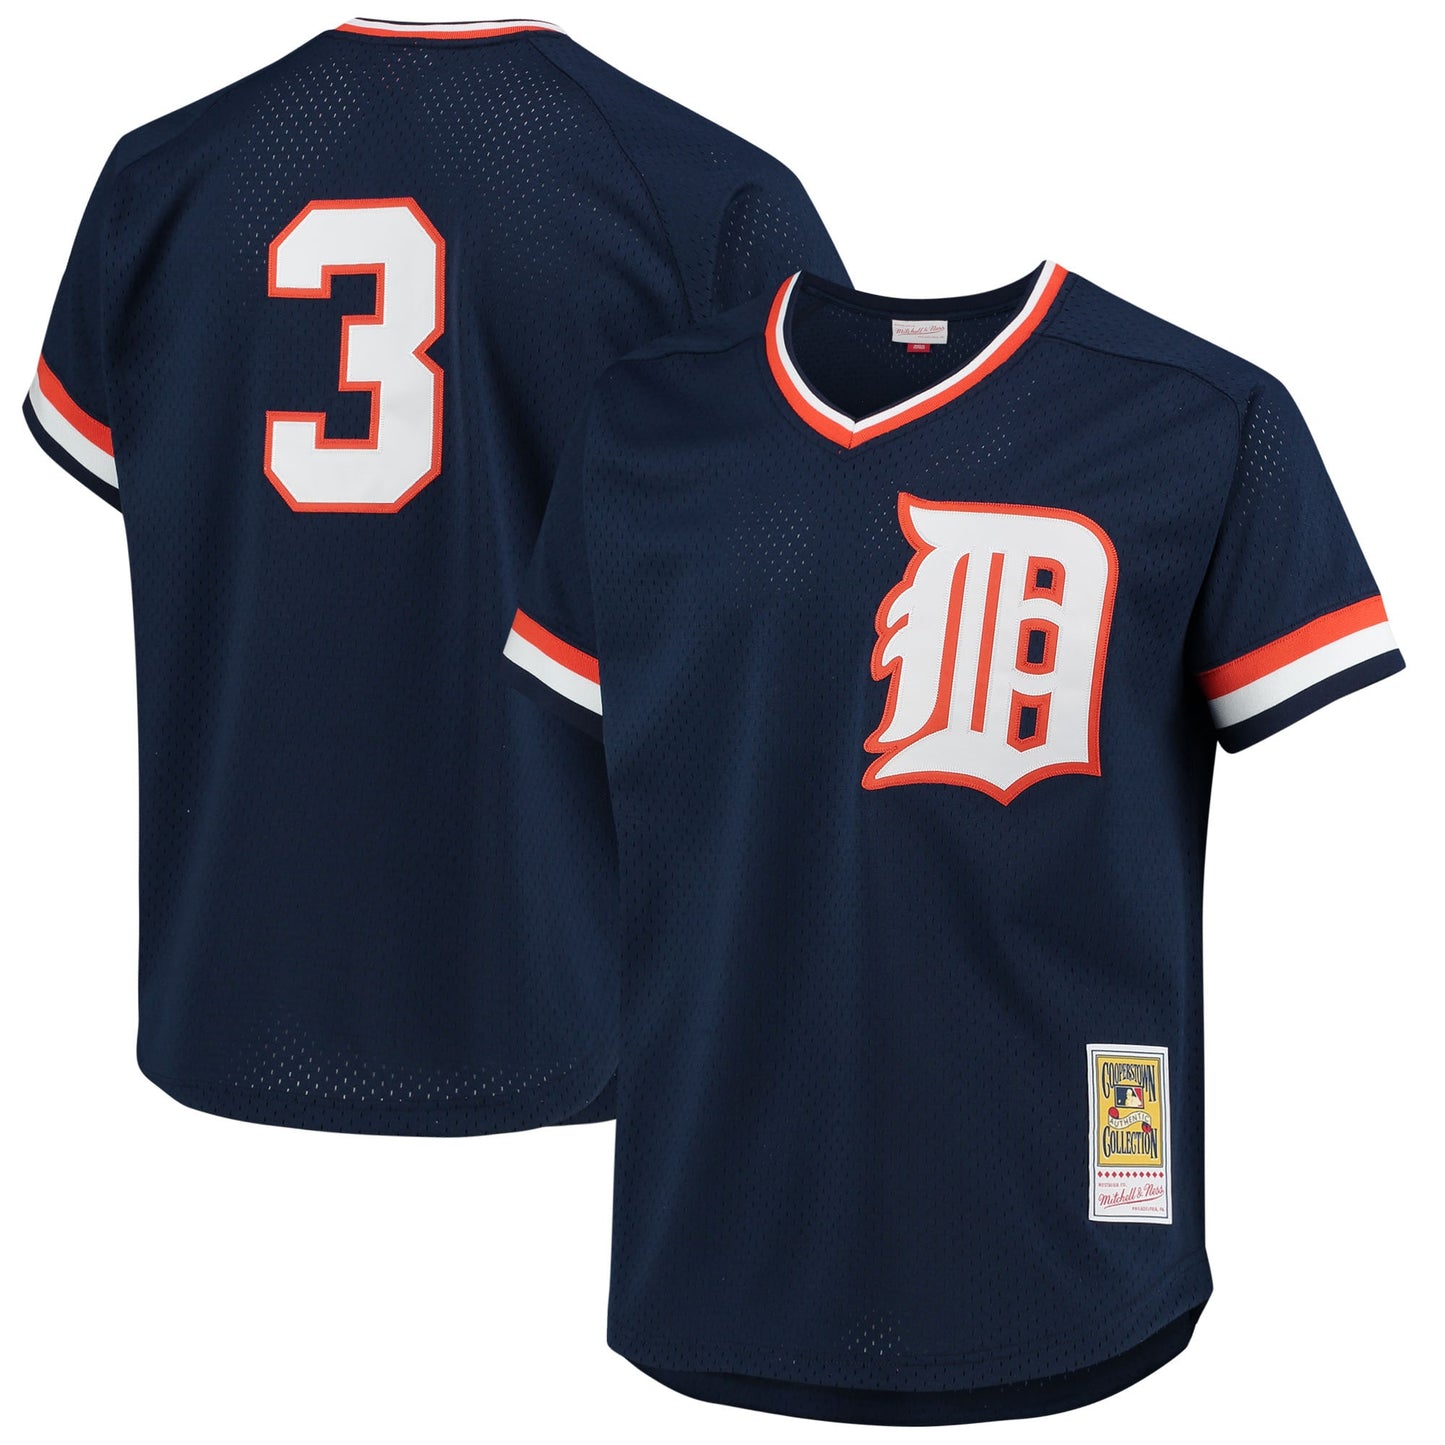 Alan Trammell Detroit Tigers Mitchell & Ness 1984 Authentic Cooperstown Collection Mesh Batting Practice Jersey - Navy